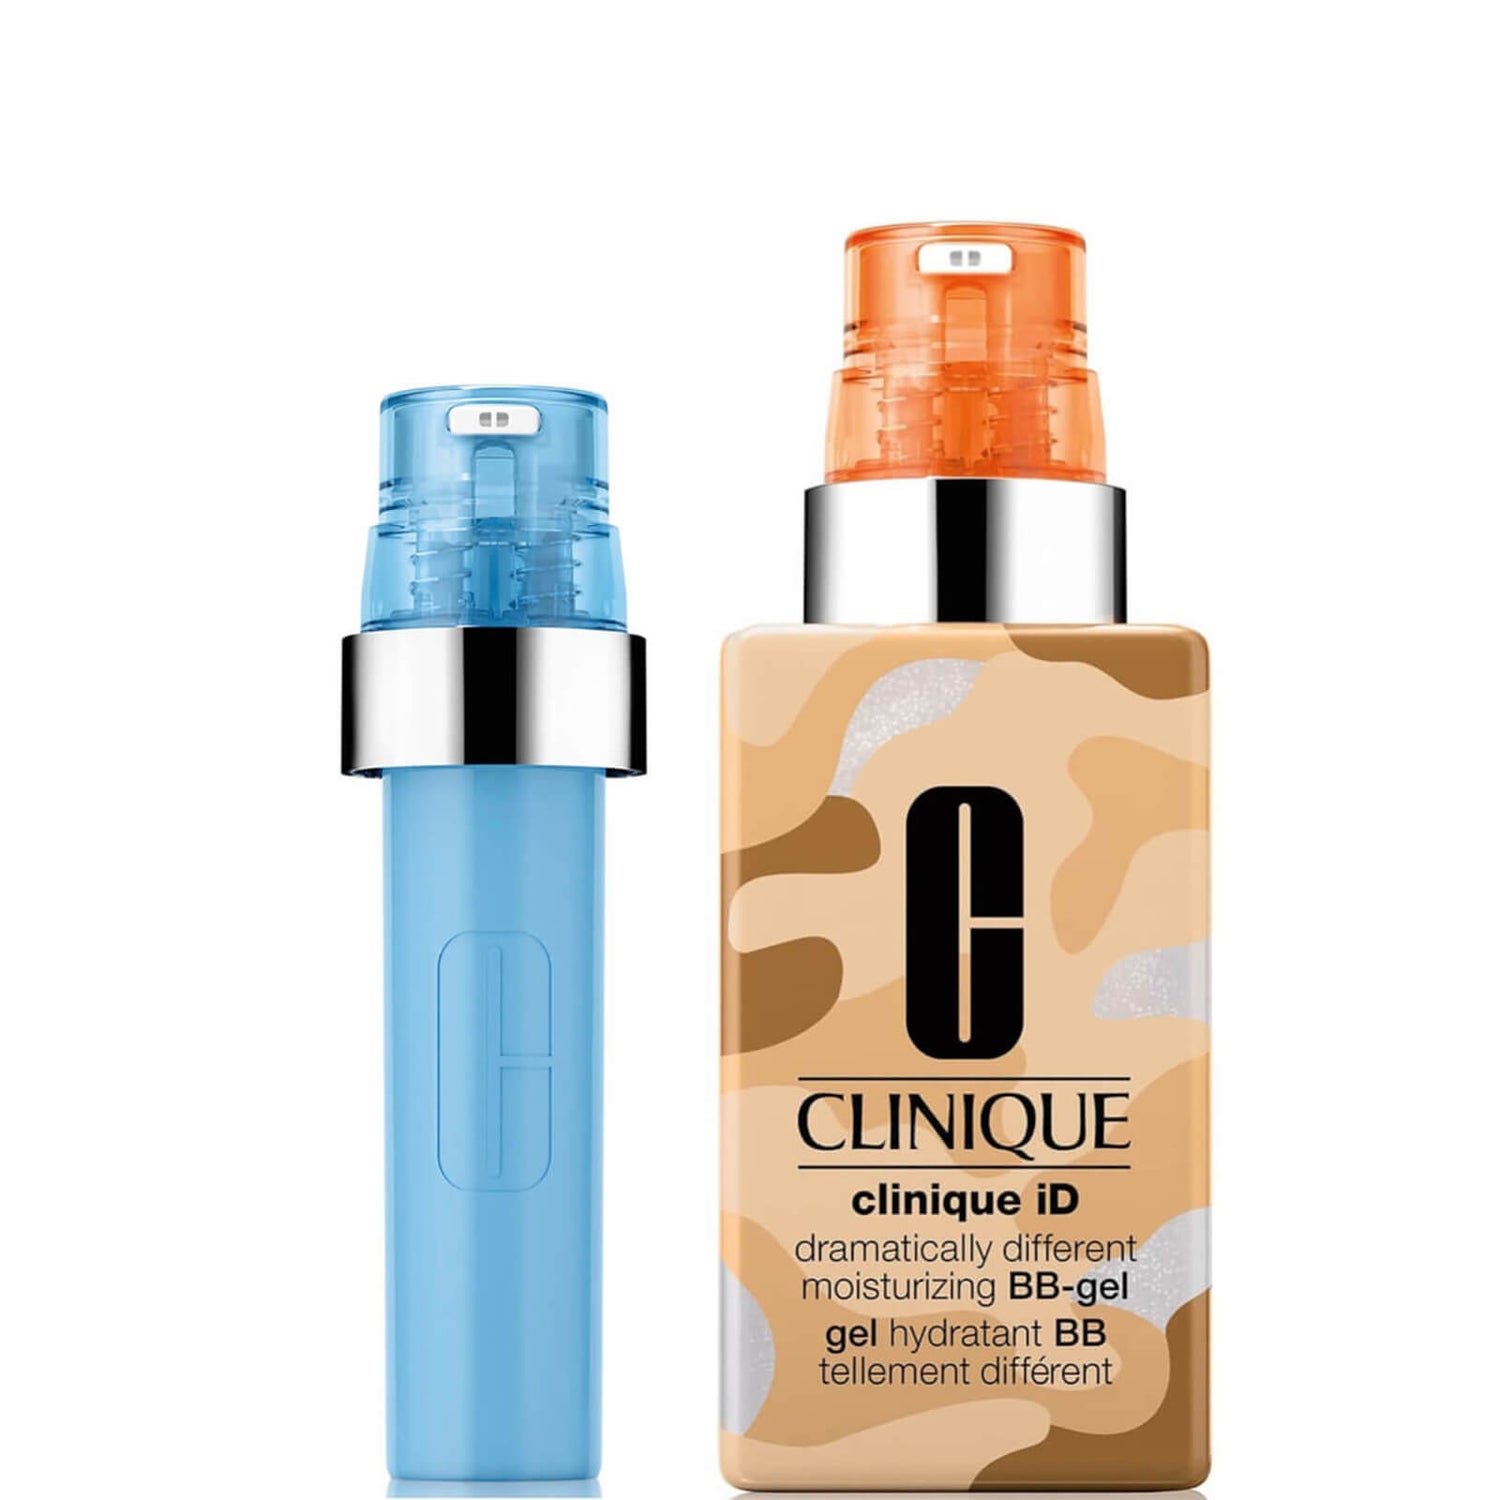 Clinique iD Dramatically Different Moisturising BB-Gel and Active Cartridge Concentrate for Uneven Skin Texture Bundle